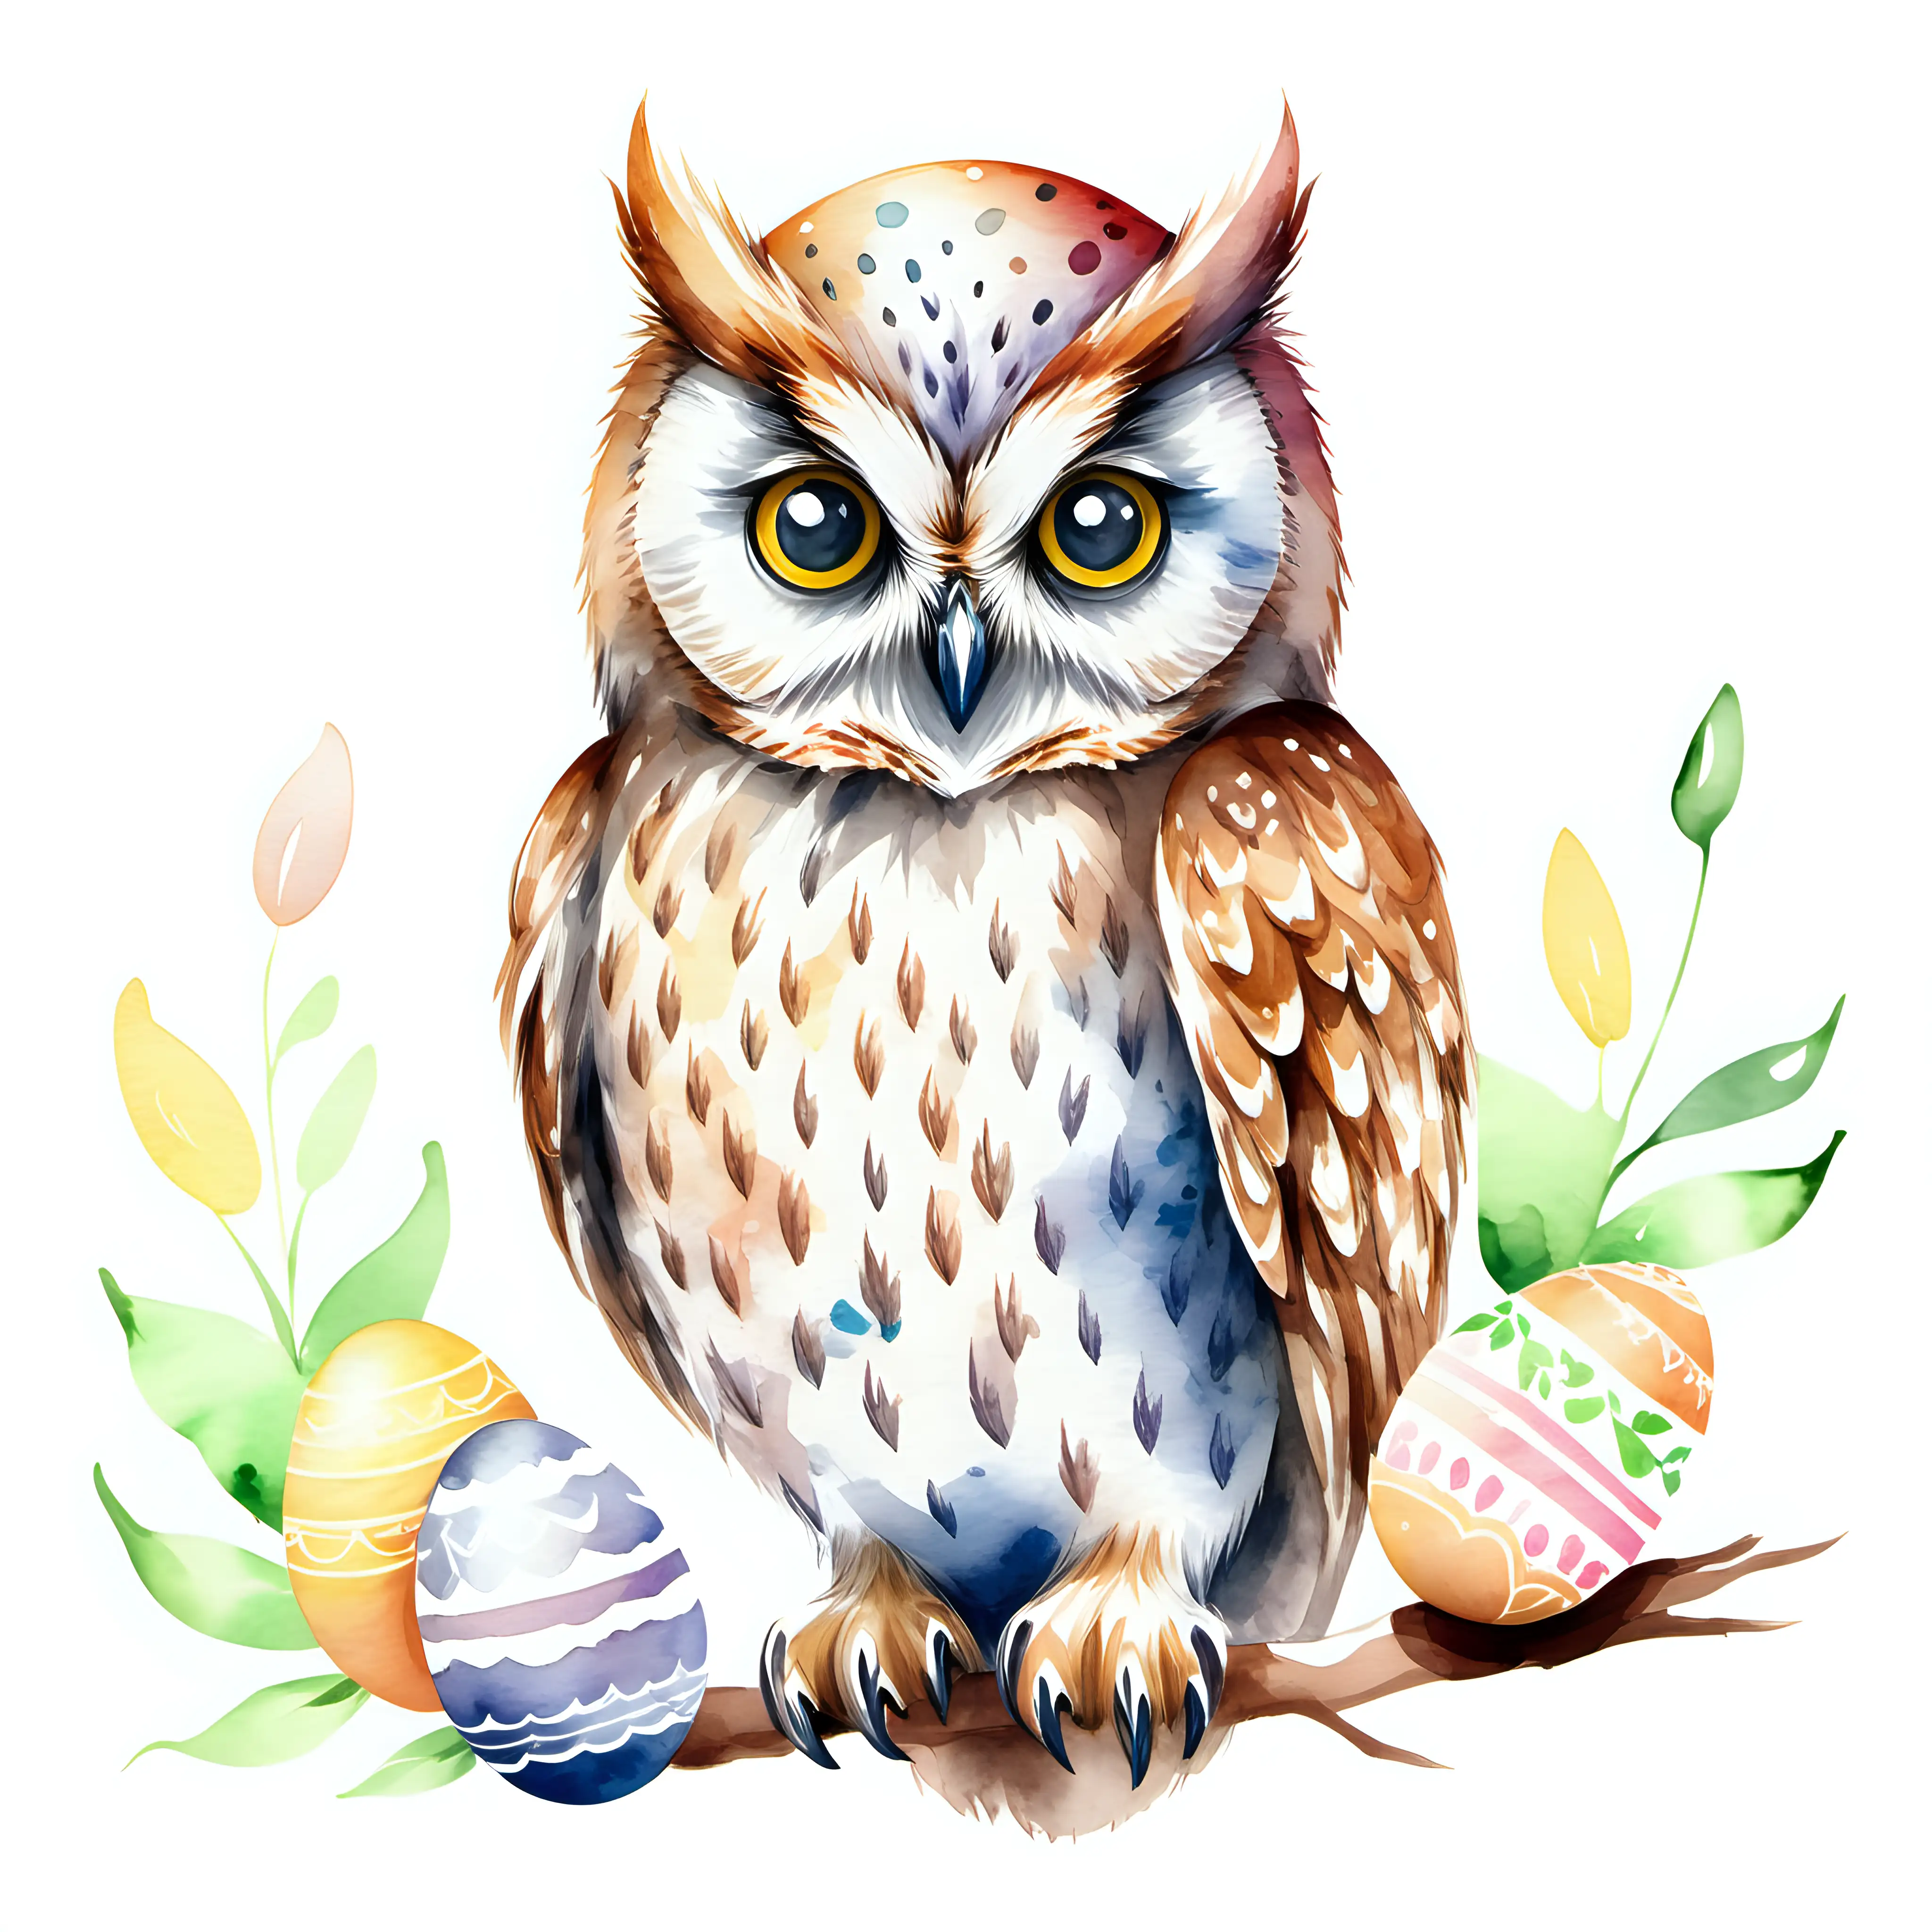 Easter Owl Watercolor Painting on White Background